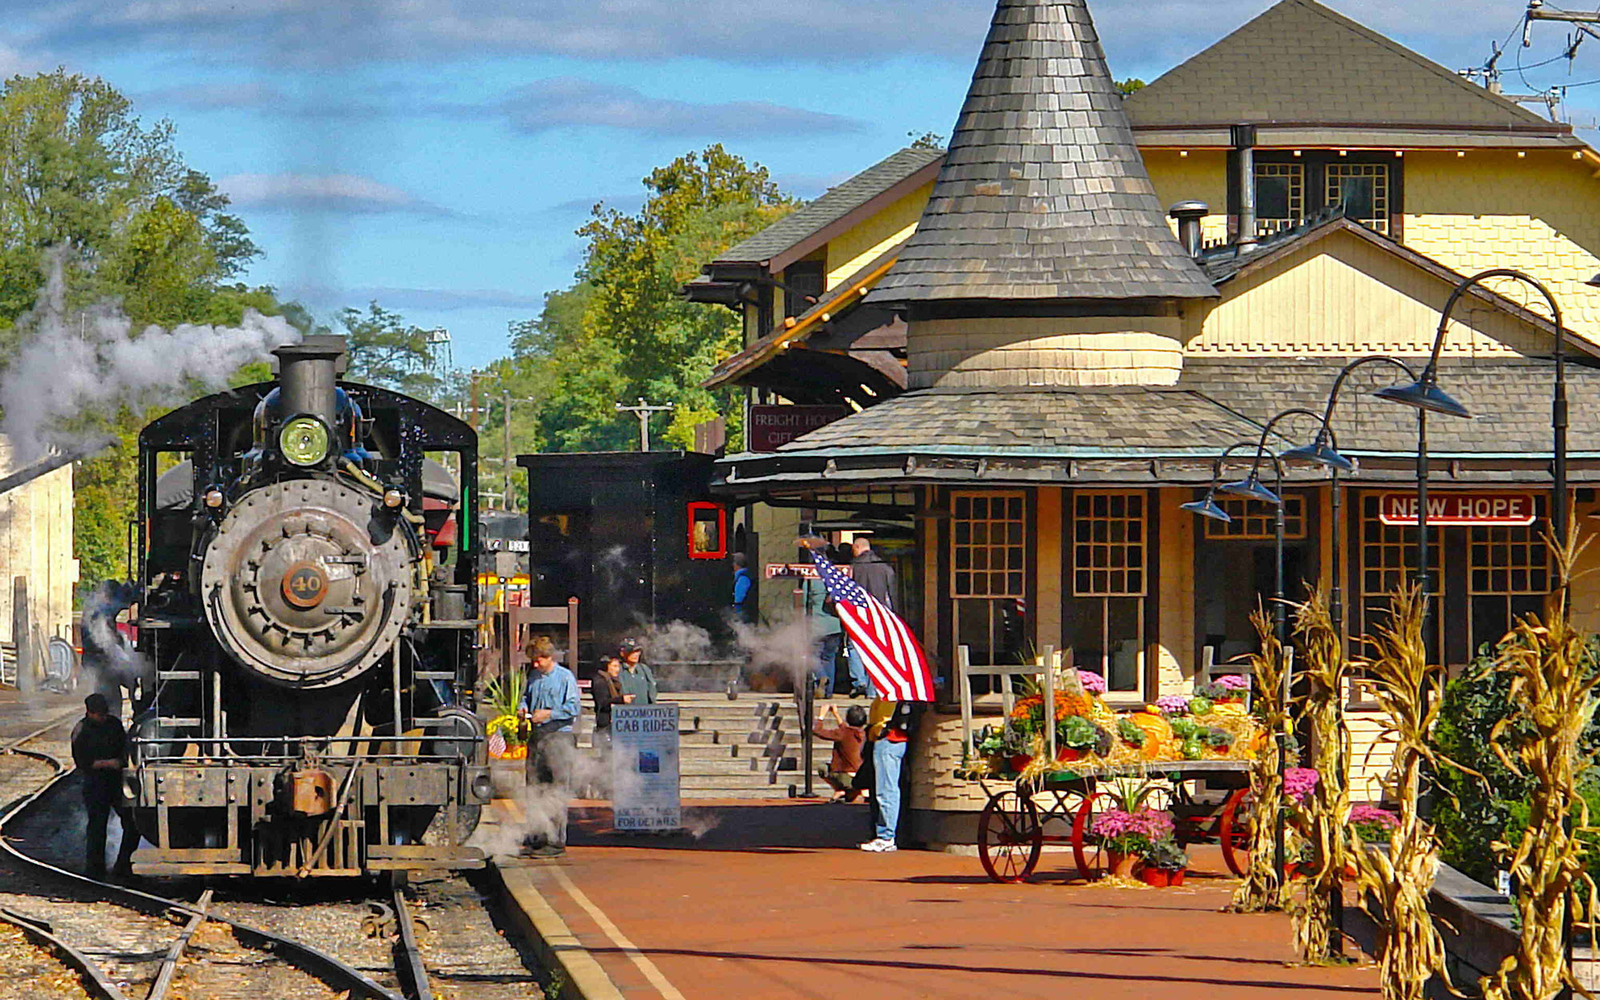 The 10 Best Small Towns to Visit for Halloween